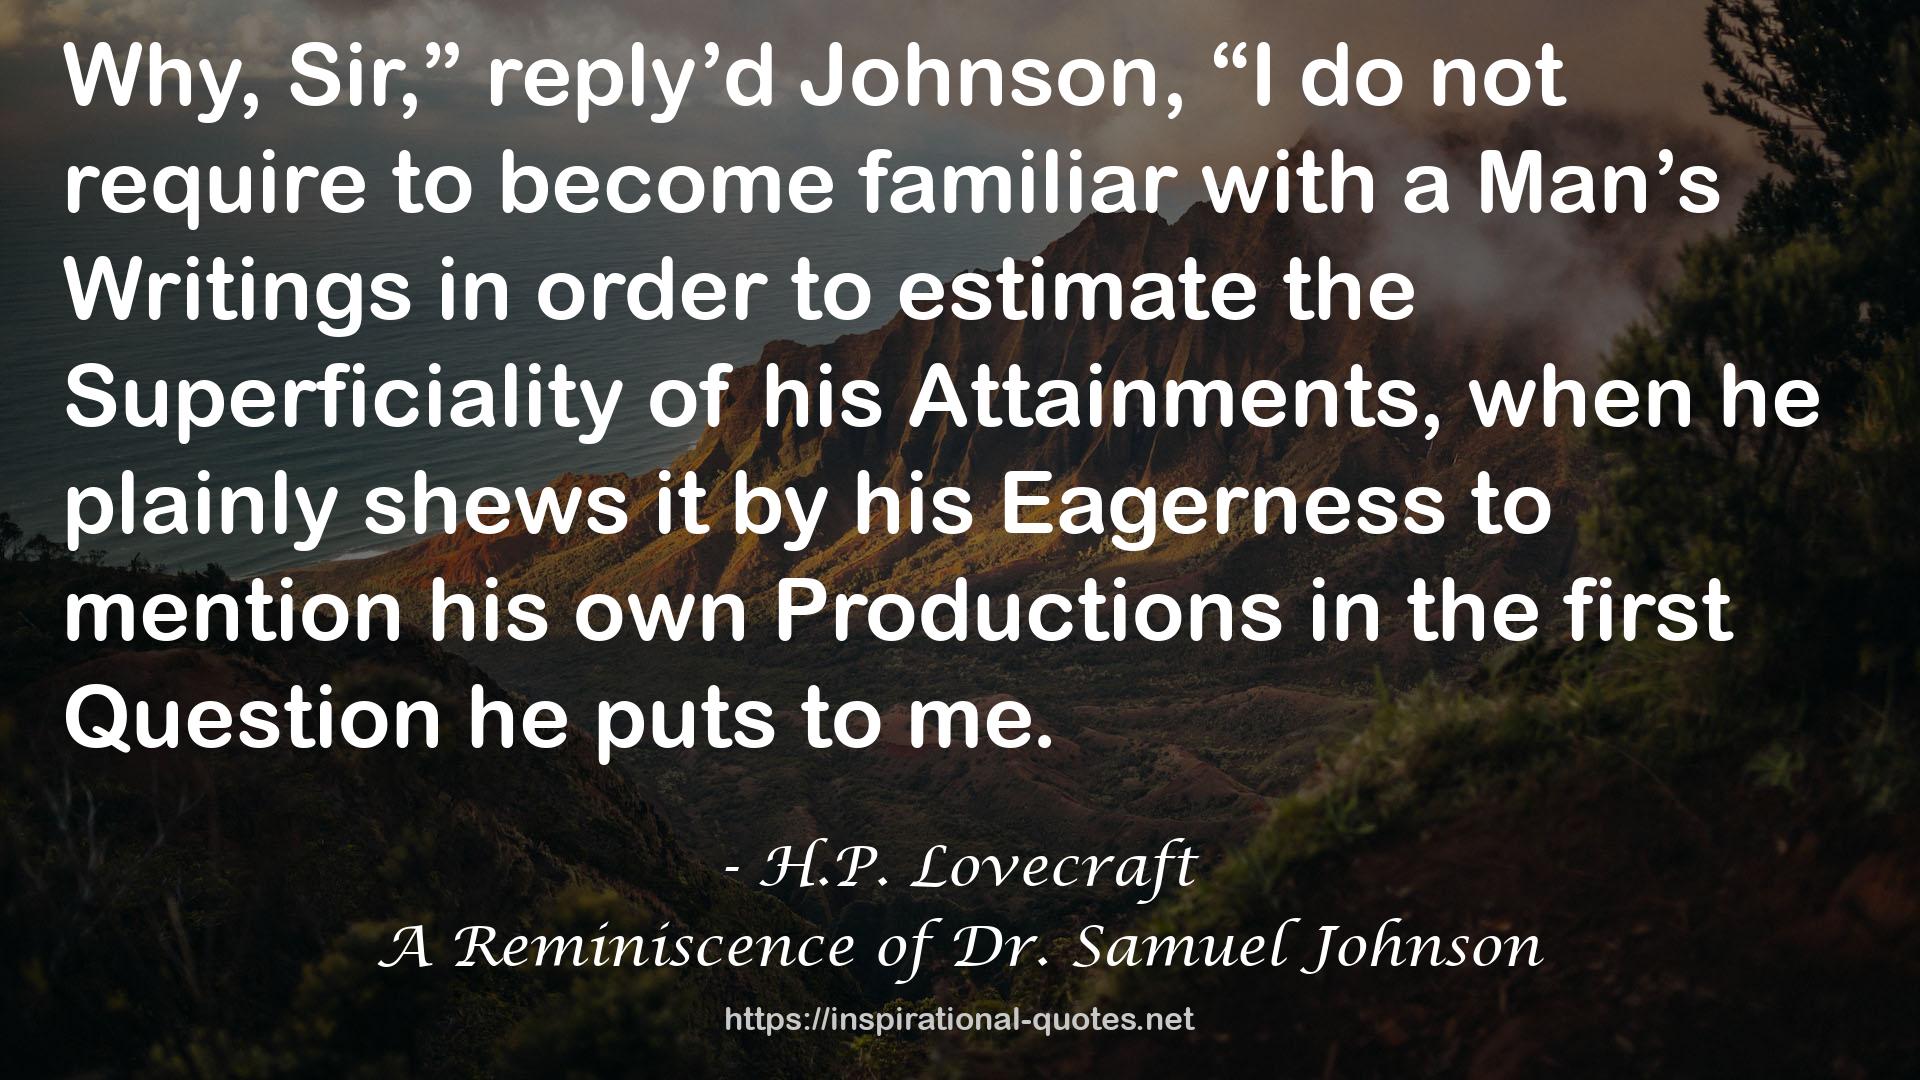 A Reminiscence of Dr. Samuel Johnson QUOTES